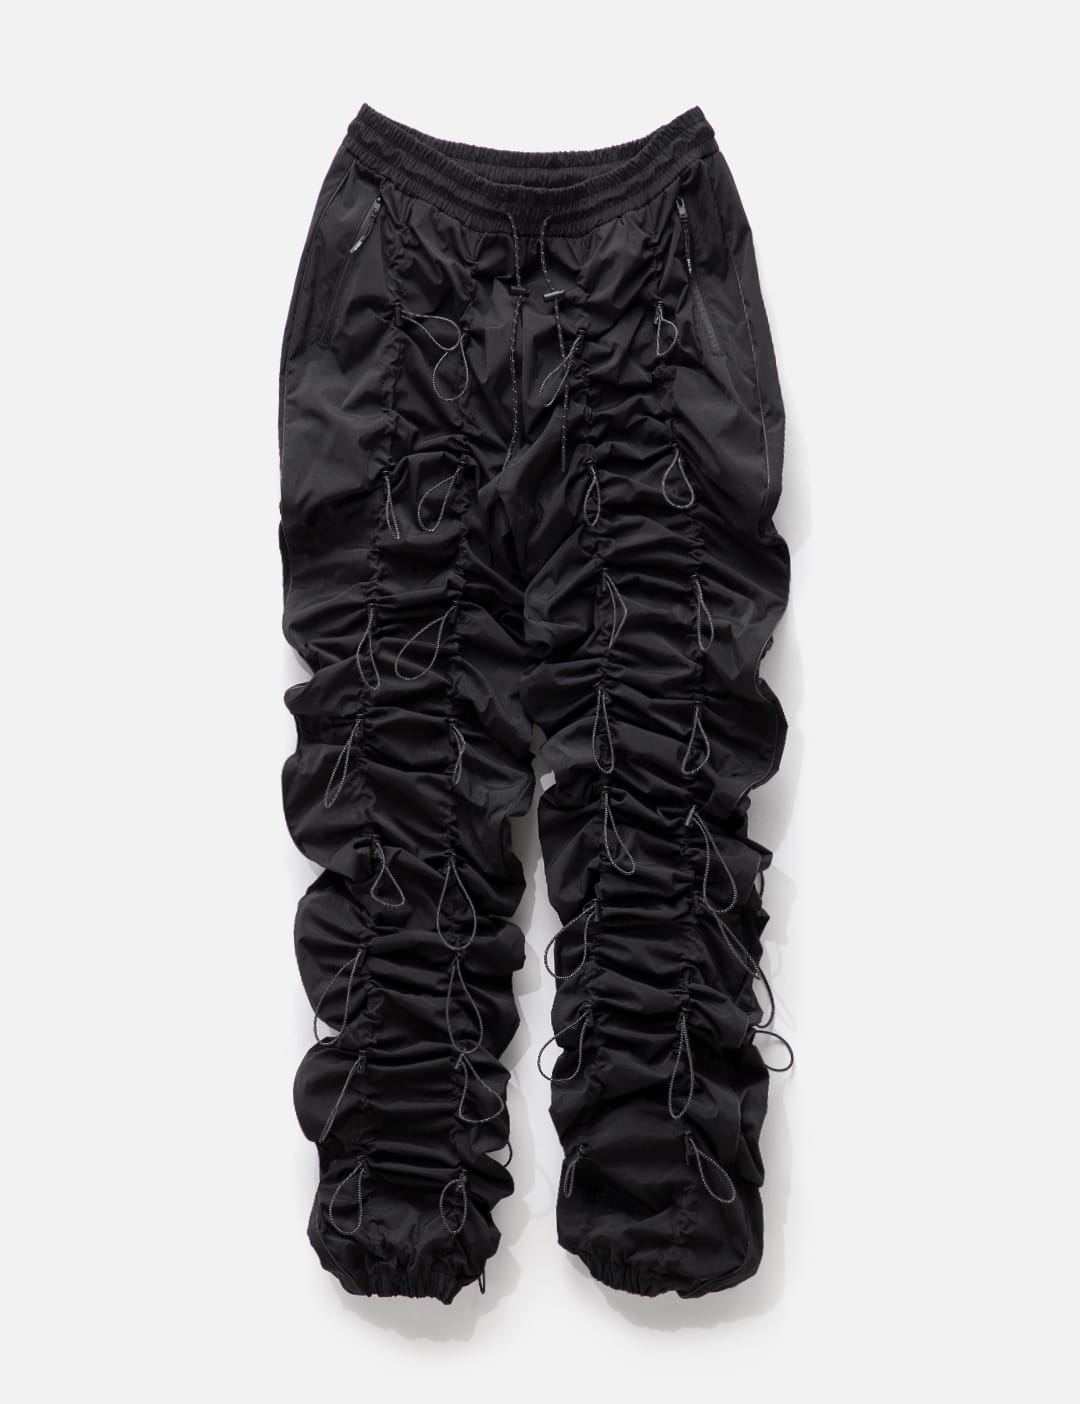 99%IS- - GOBCHANG PANTS | HBX - Globally Curated Fashion and